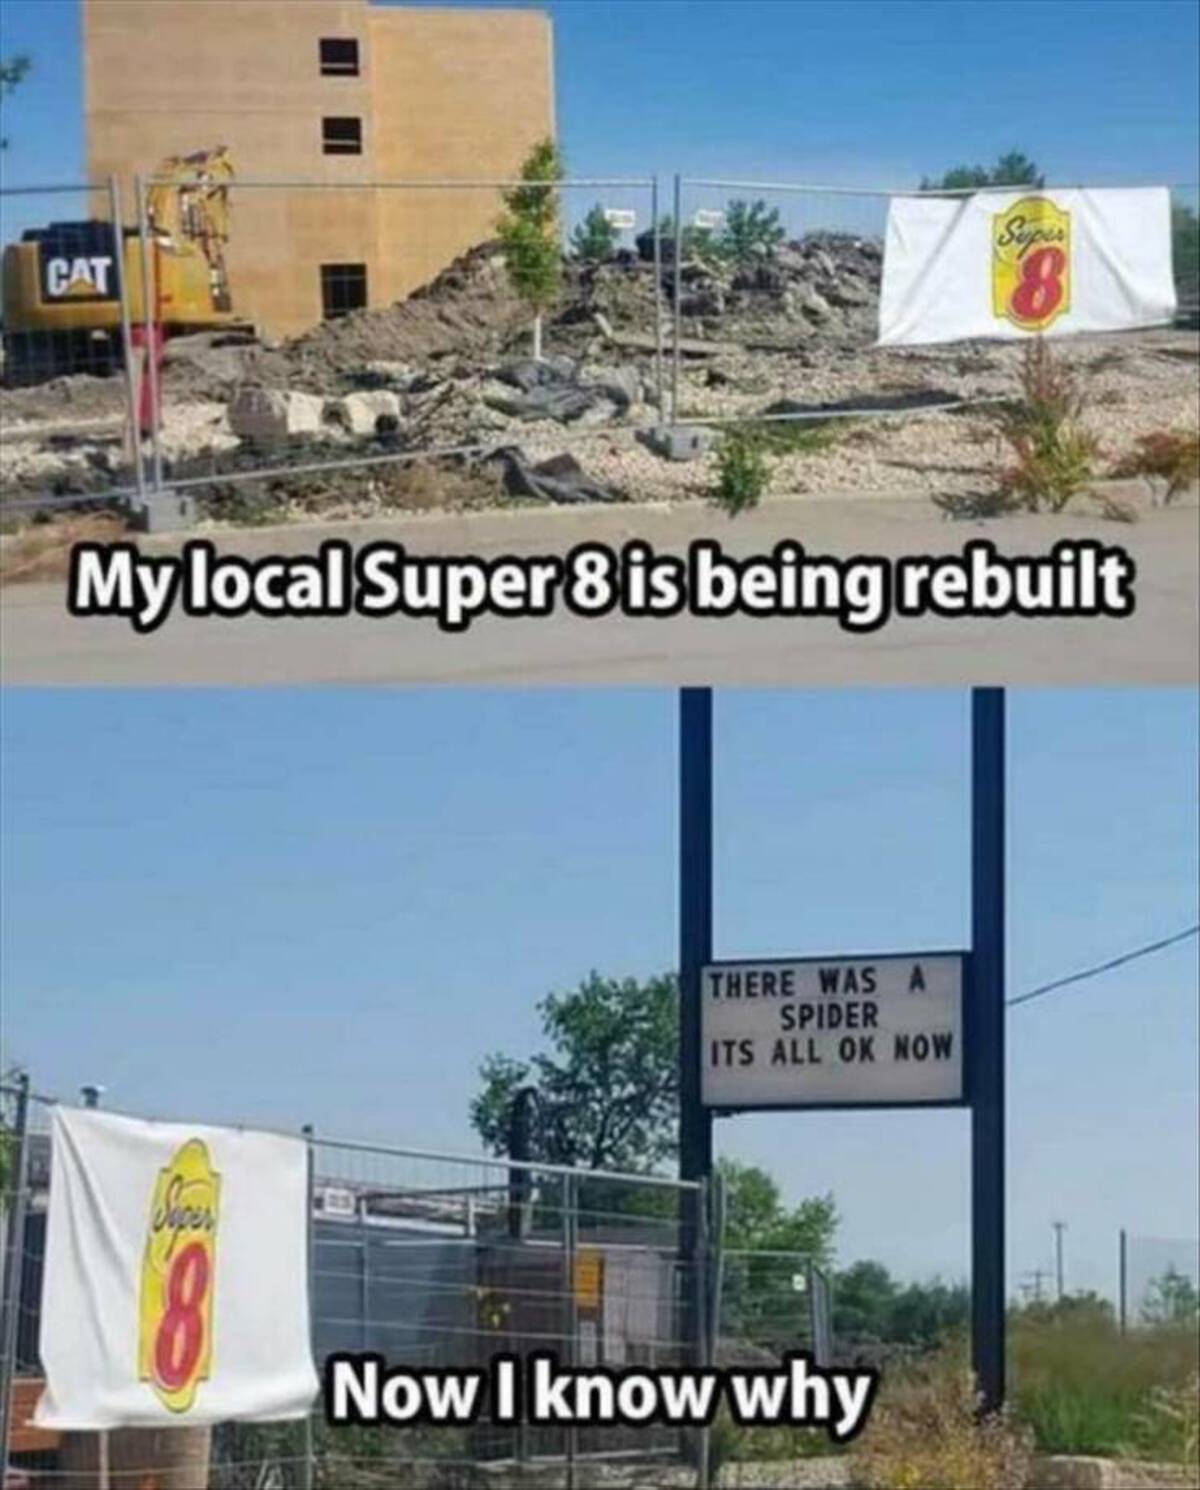 super 8 spider meme - Cat Supe 8 My local Super 8 is being rebuilt There Was A Spider Its All Ok Now Now I know why